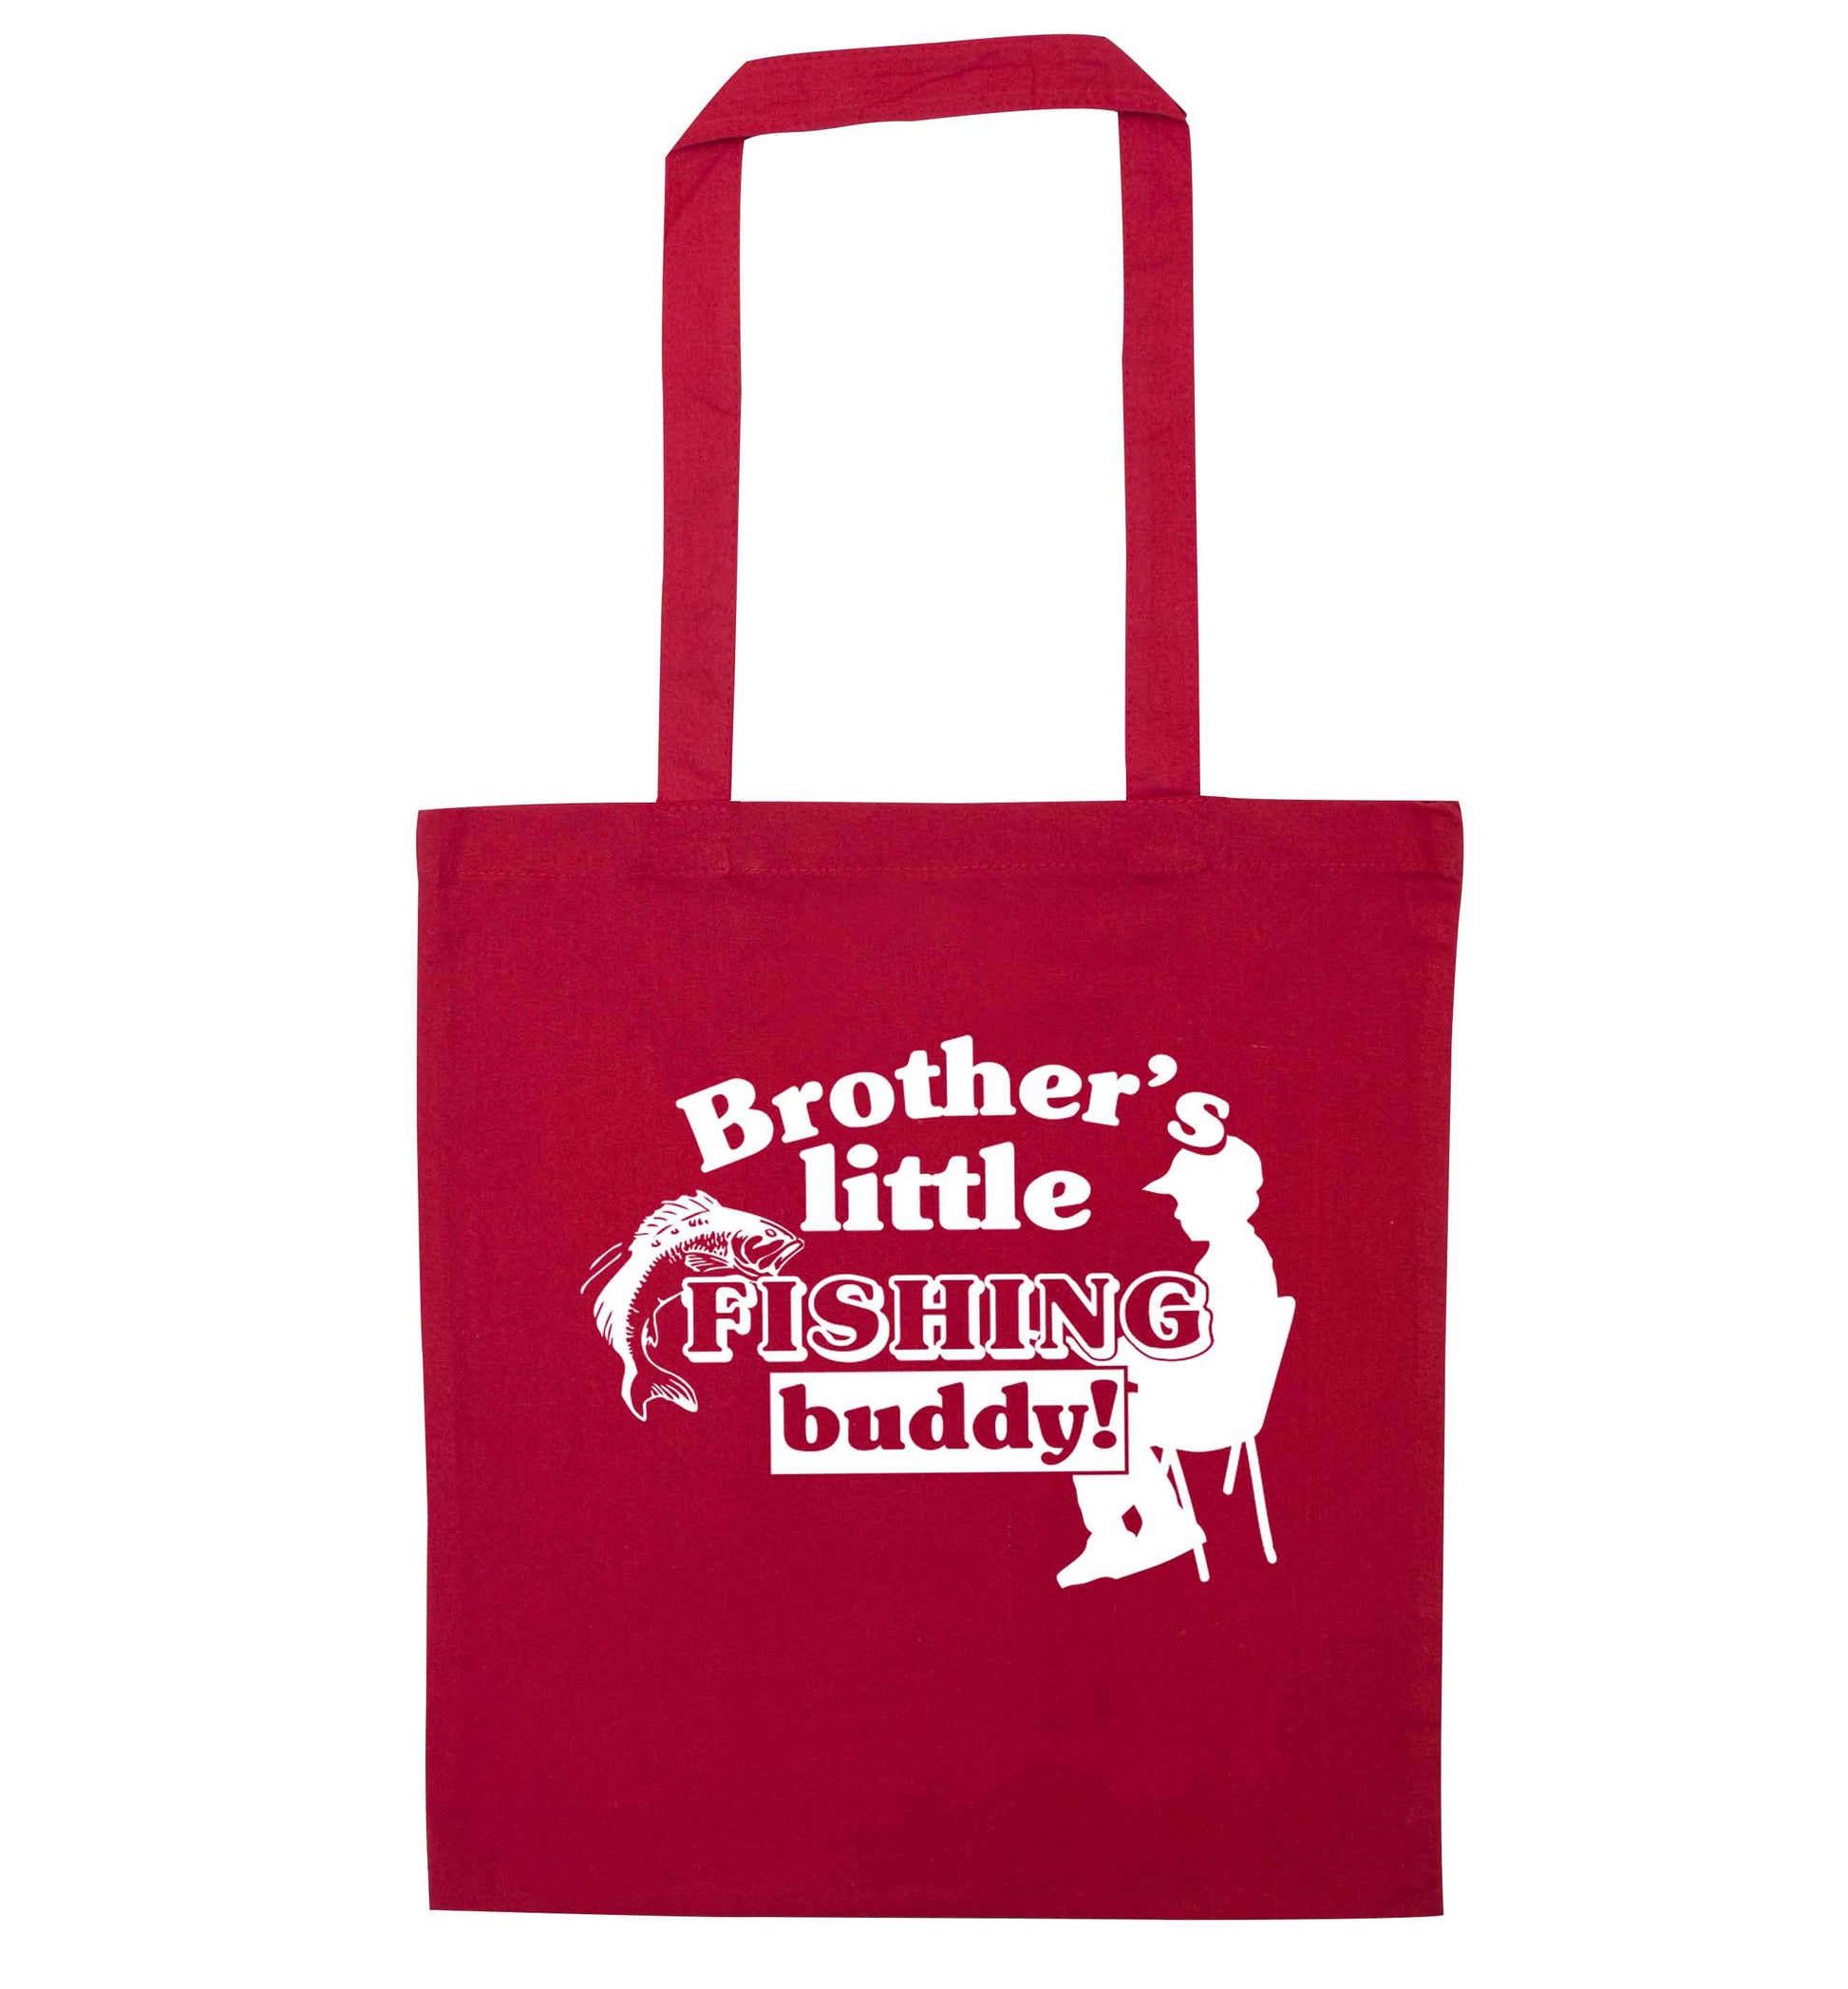 Brother's little fishing buddy red tote bag